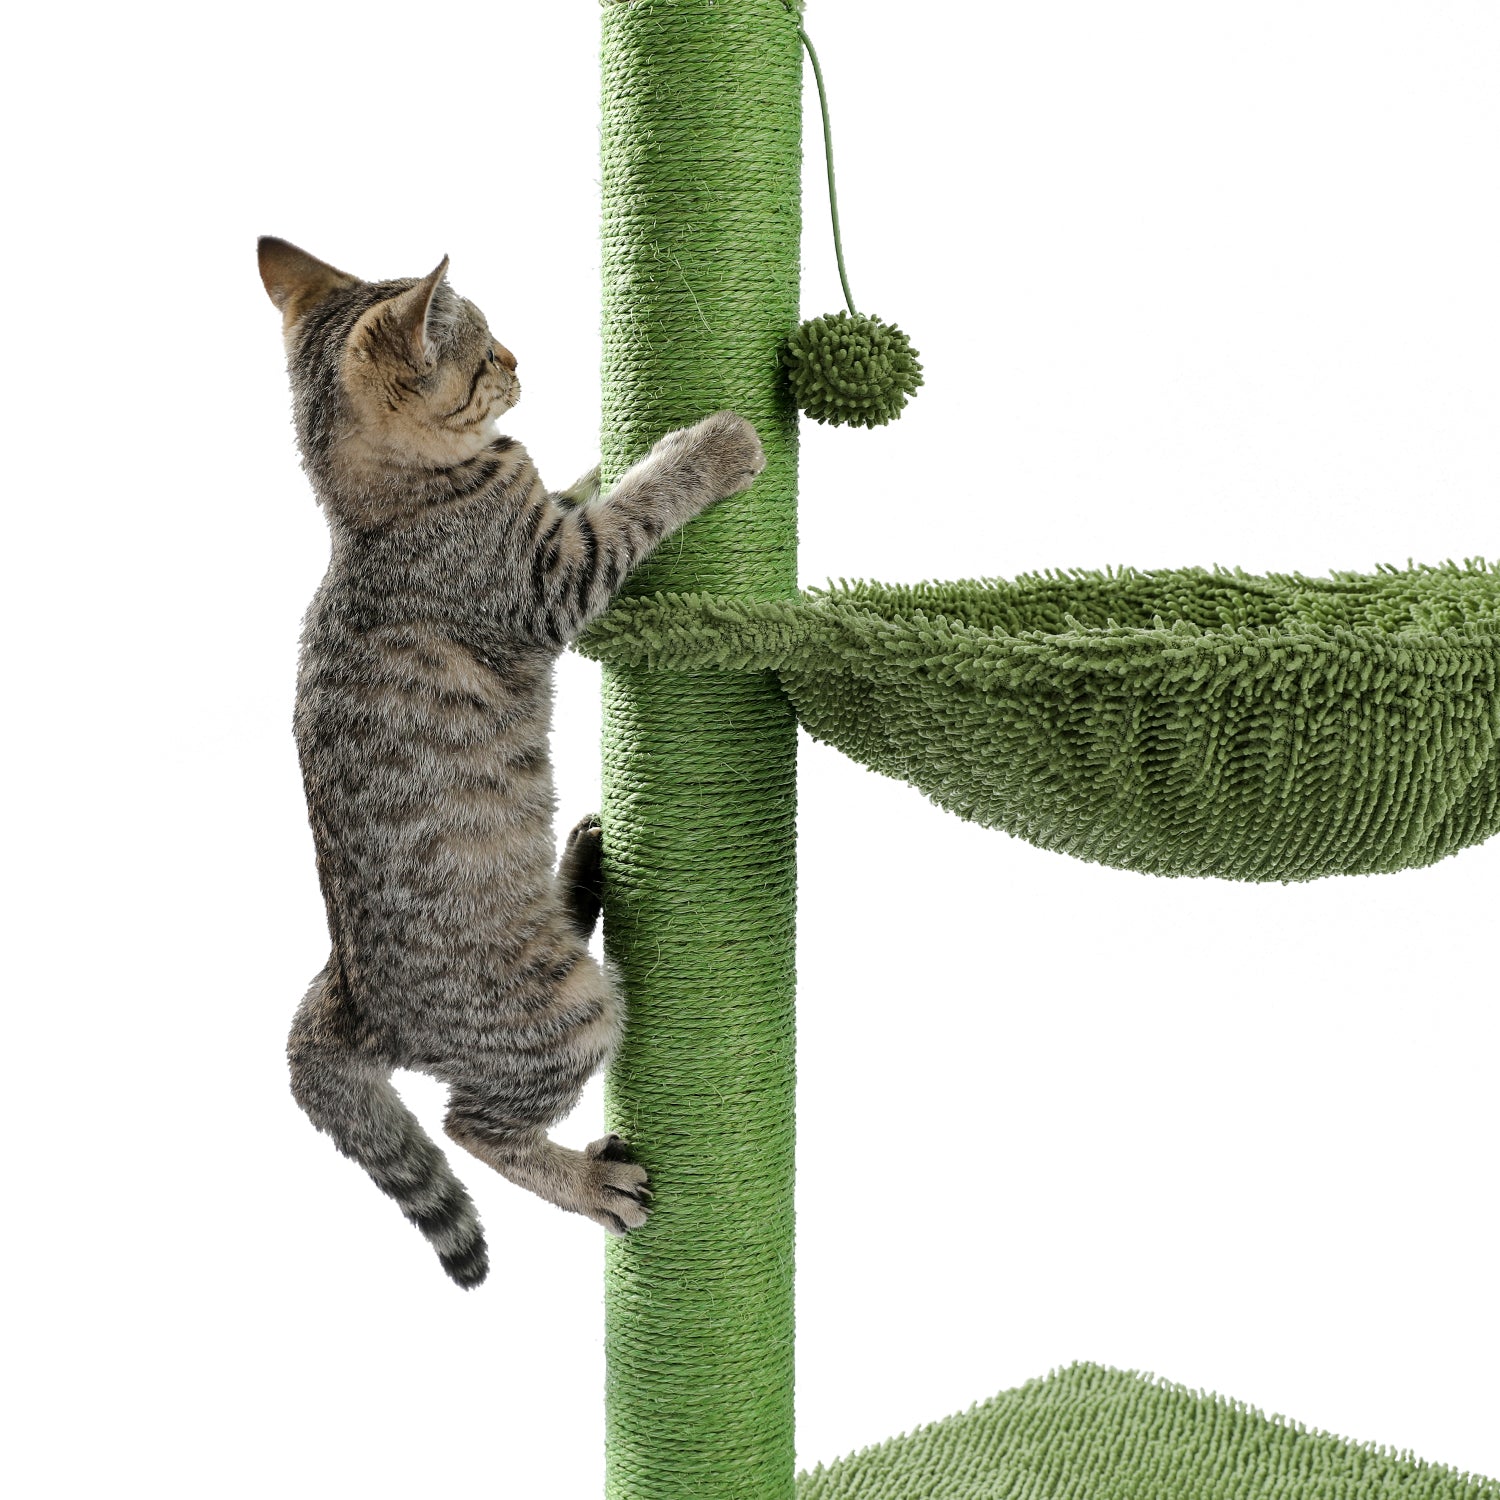 Cactus Cat Scratcher - Cat Cactus Scratching Post with Ball,Natural Sisal Ropes - save Your Furniture with Durable Handmade Cactus Cat Tree - Loads of Entertainment for Your Cat